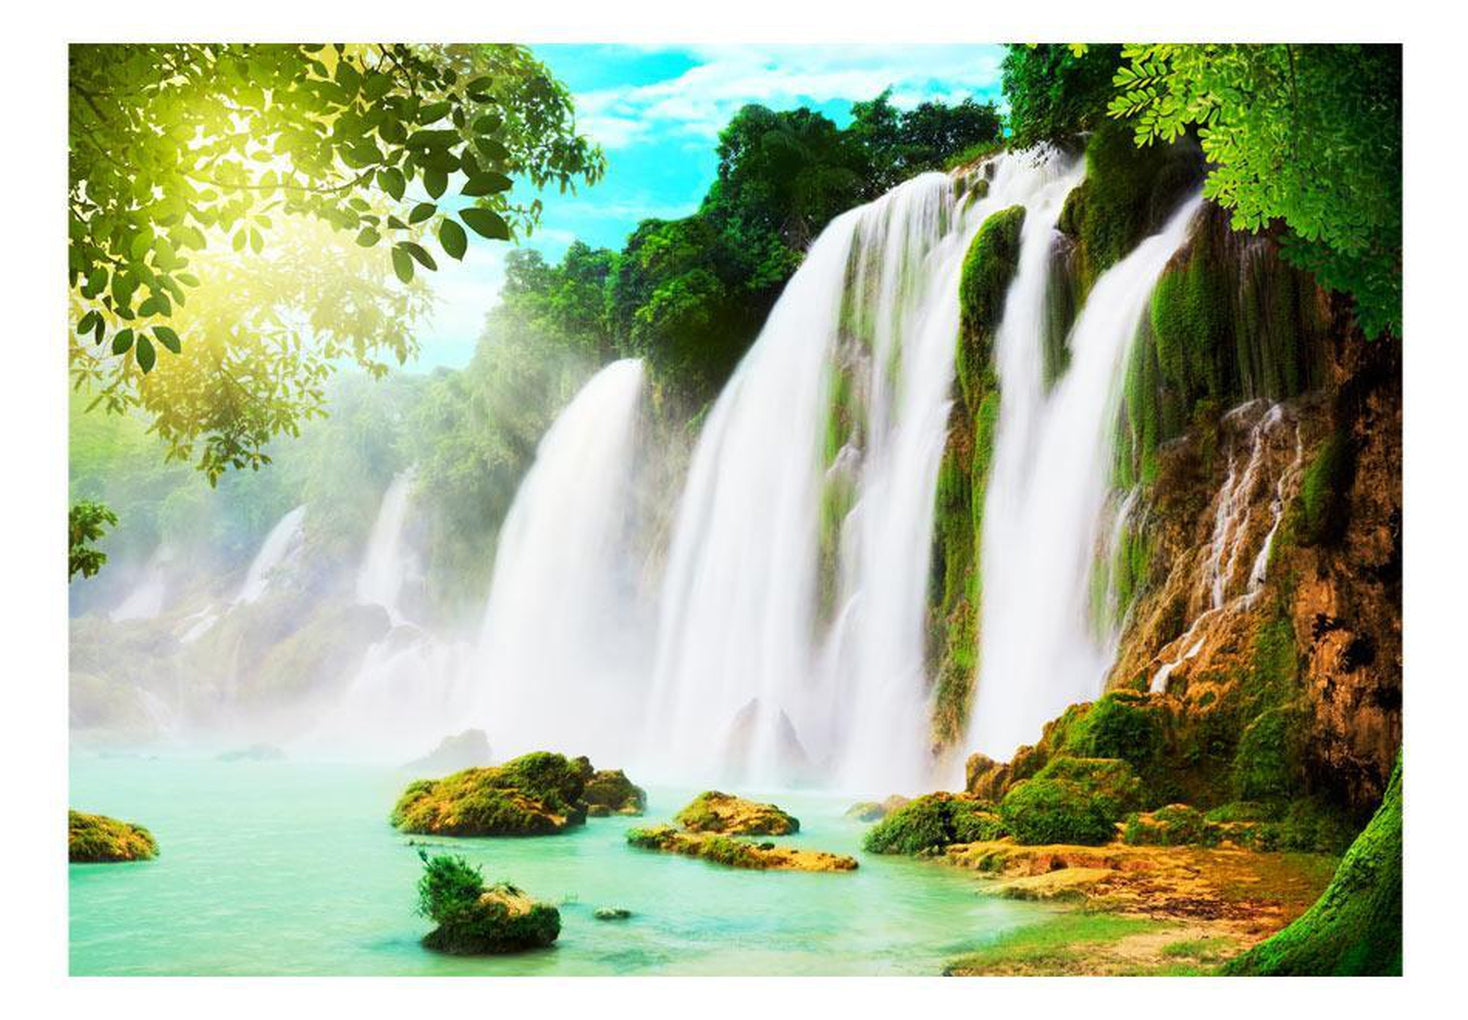 Wall mural - The beauty of nature: Waterfall-TipTopHomeDecor